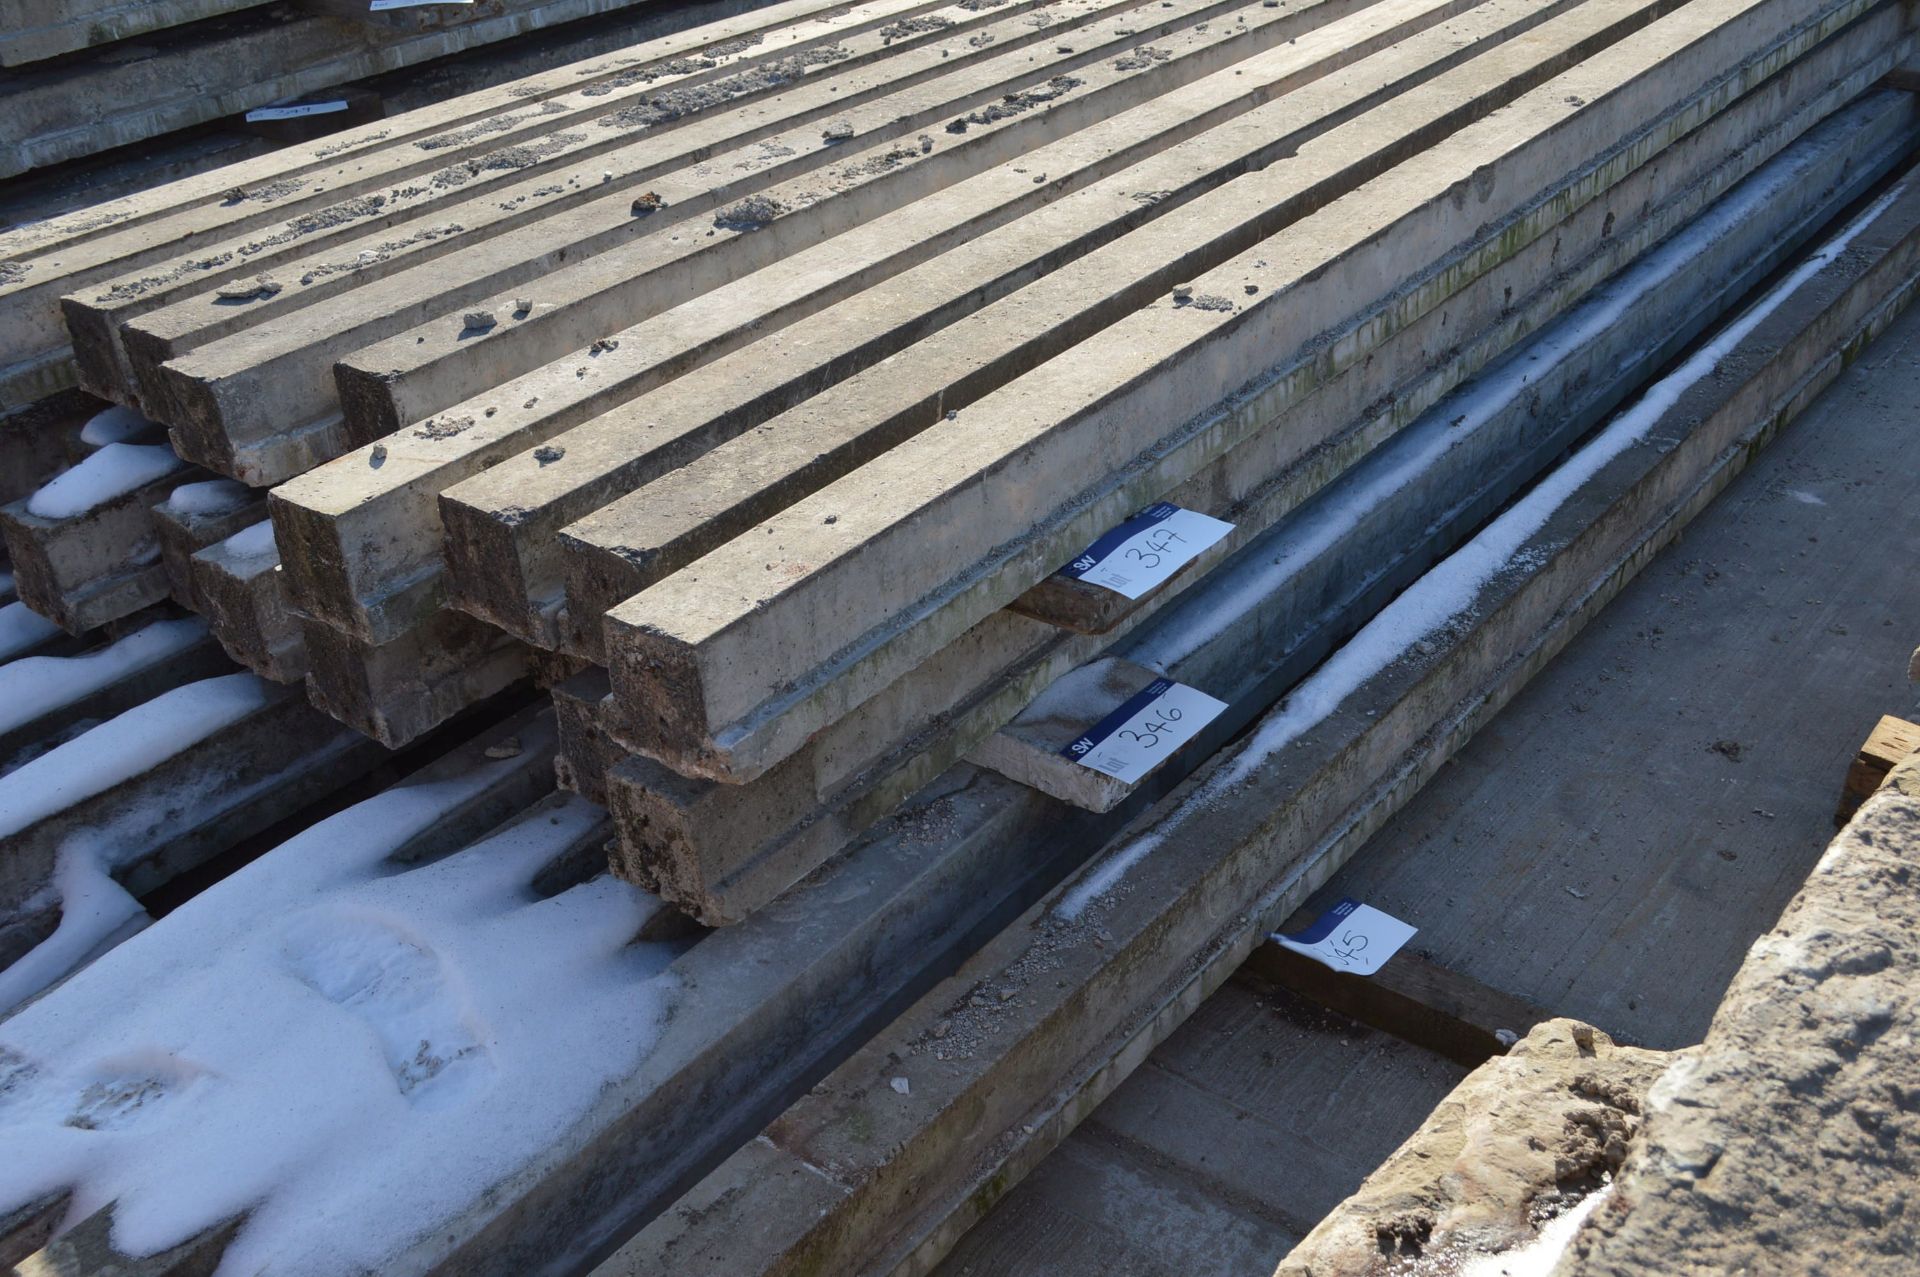 Ten Reinforced Concrete Floor Beams, mainly approx. 4.5m long